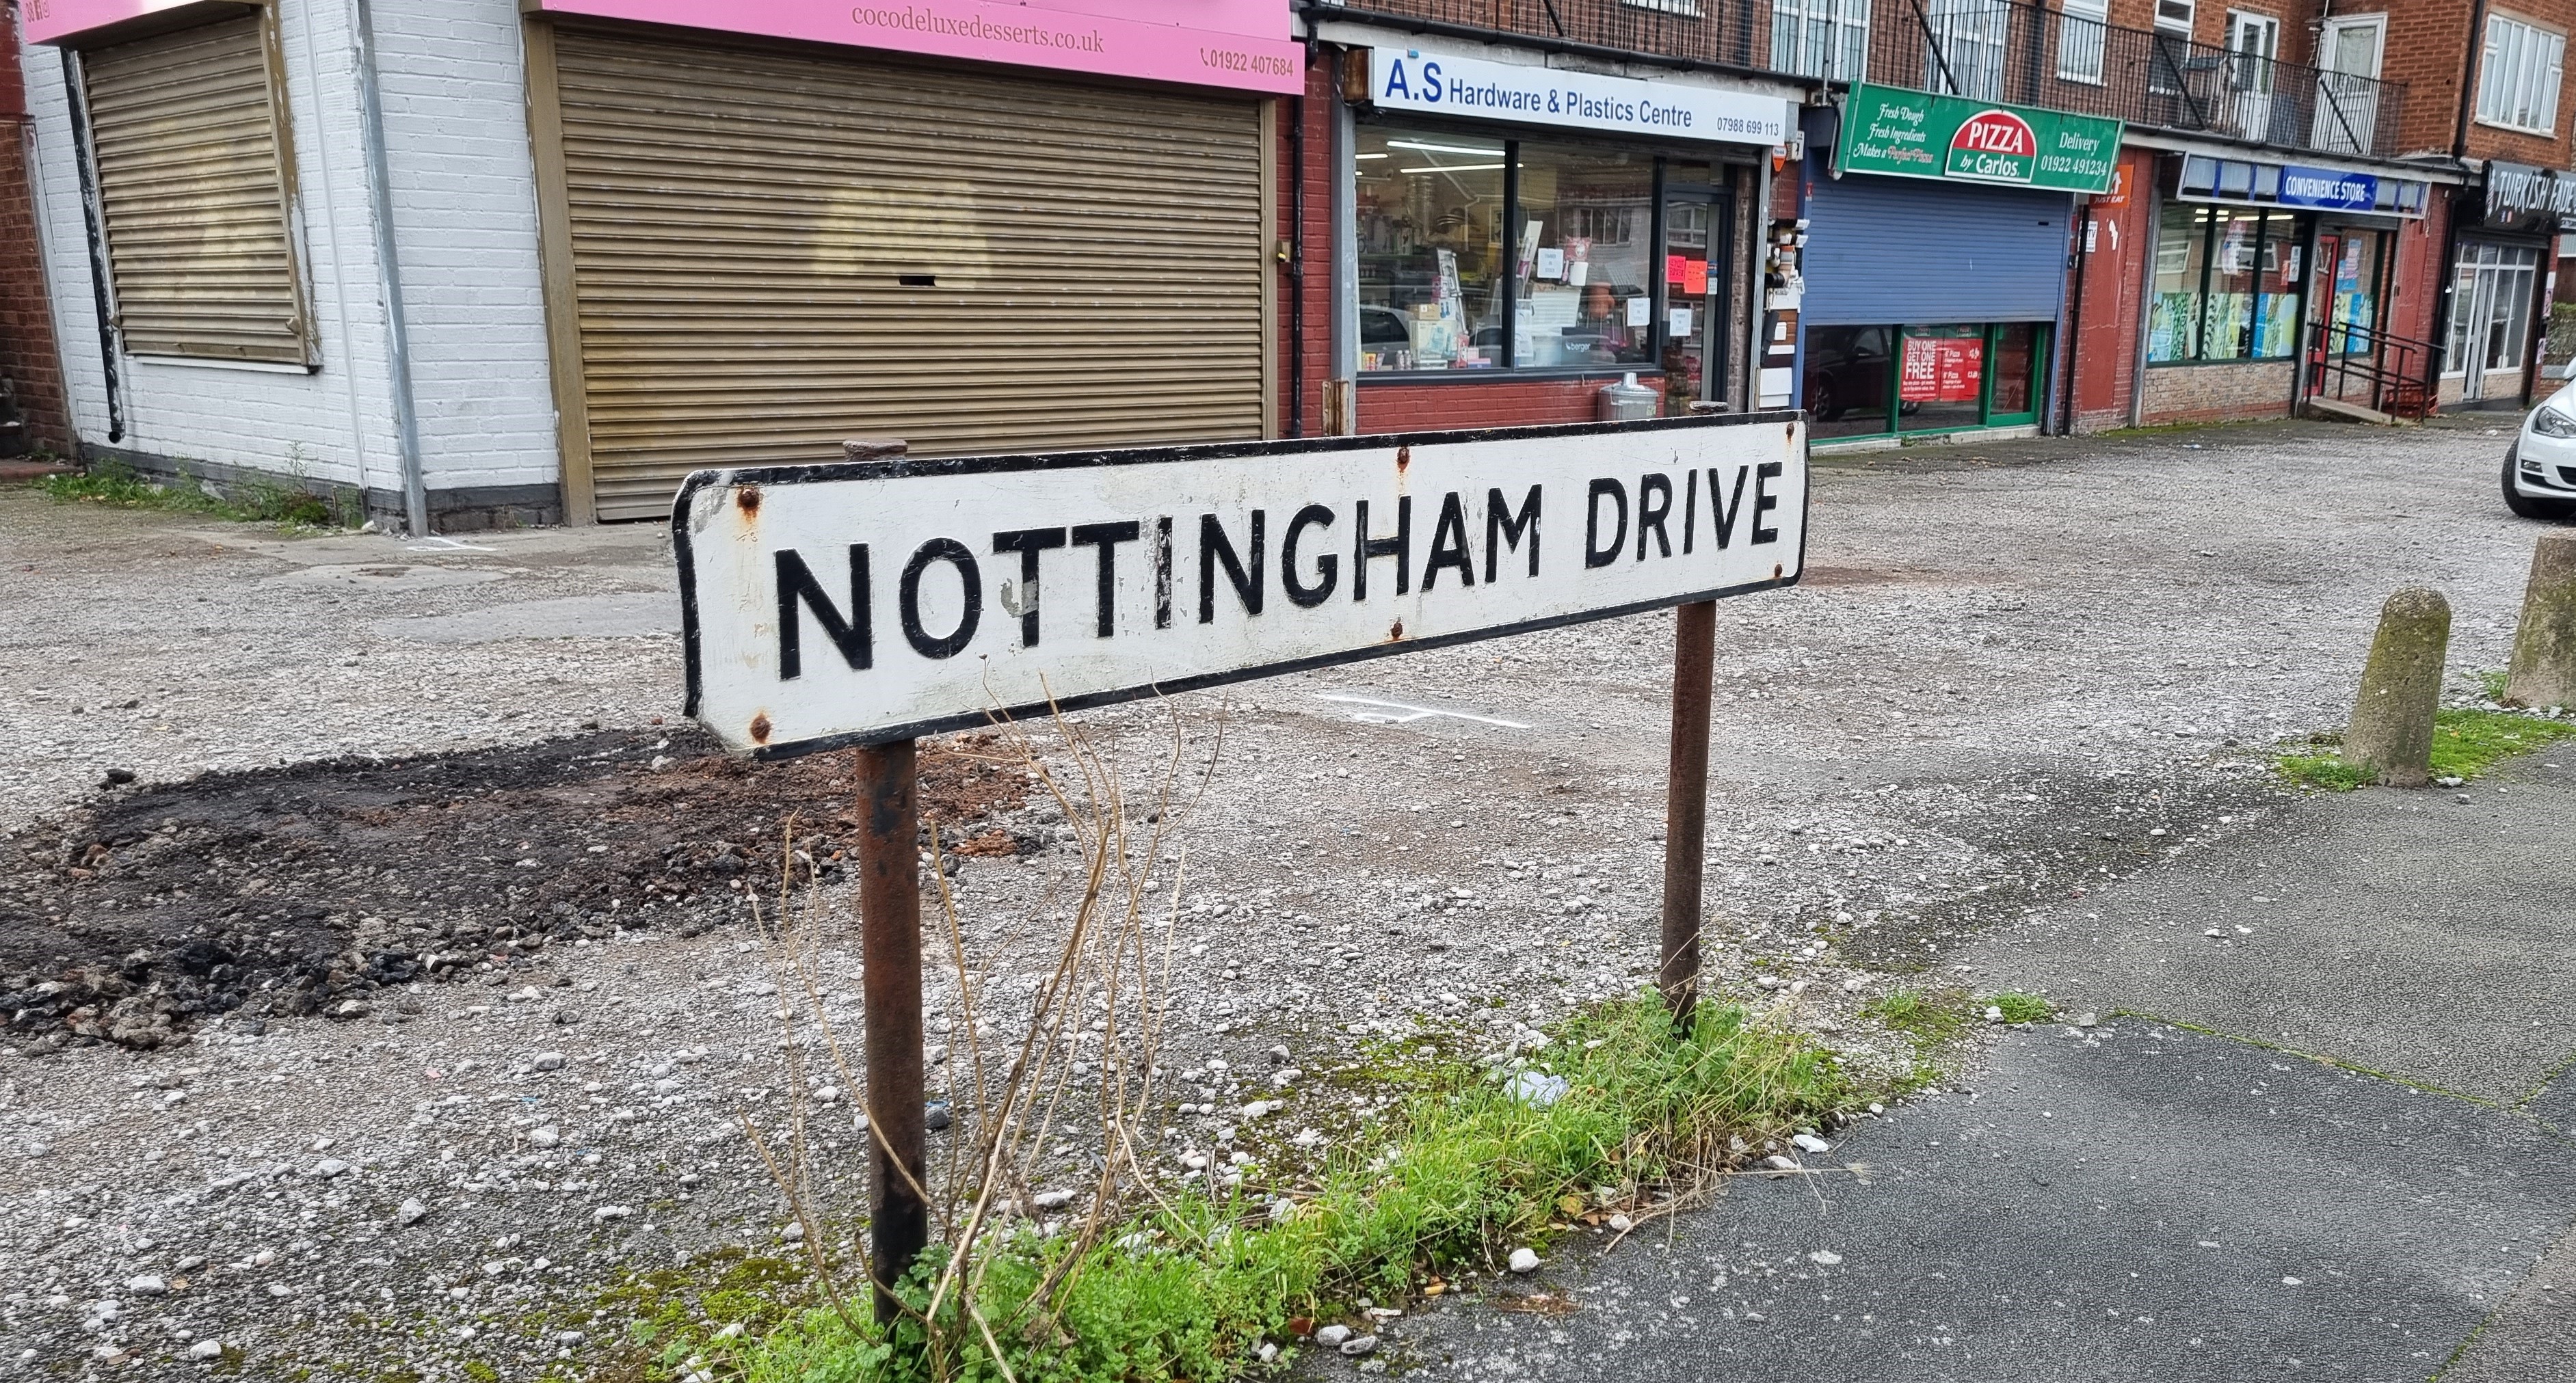 Street sign that reads Nottingham Drive, situated in front of a shopping area with carpark